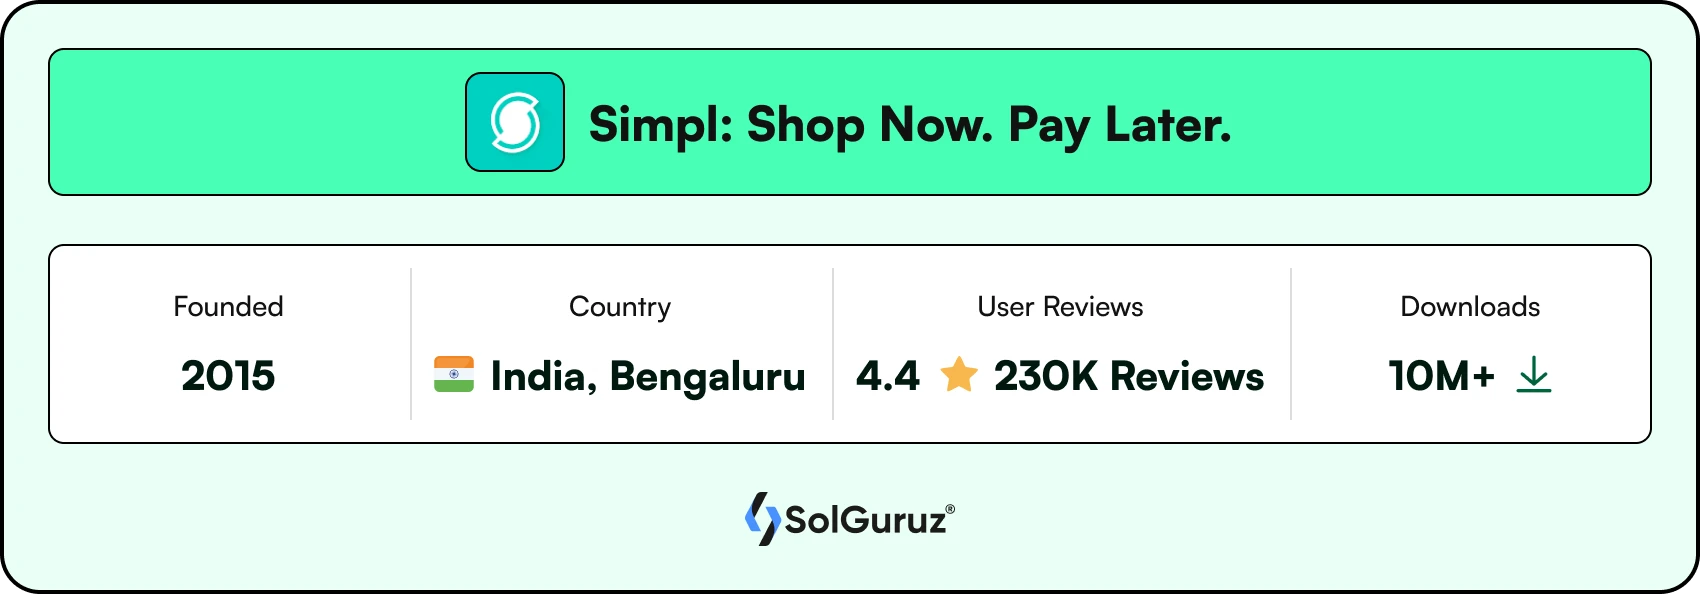 Simpl - Shop Now Pay Later App in India